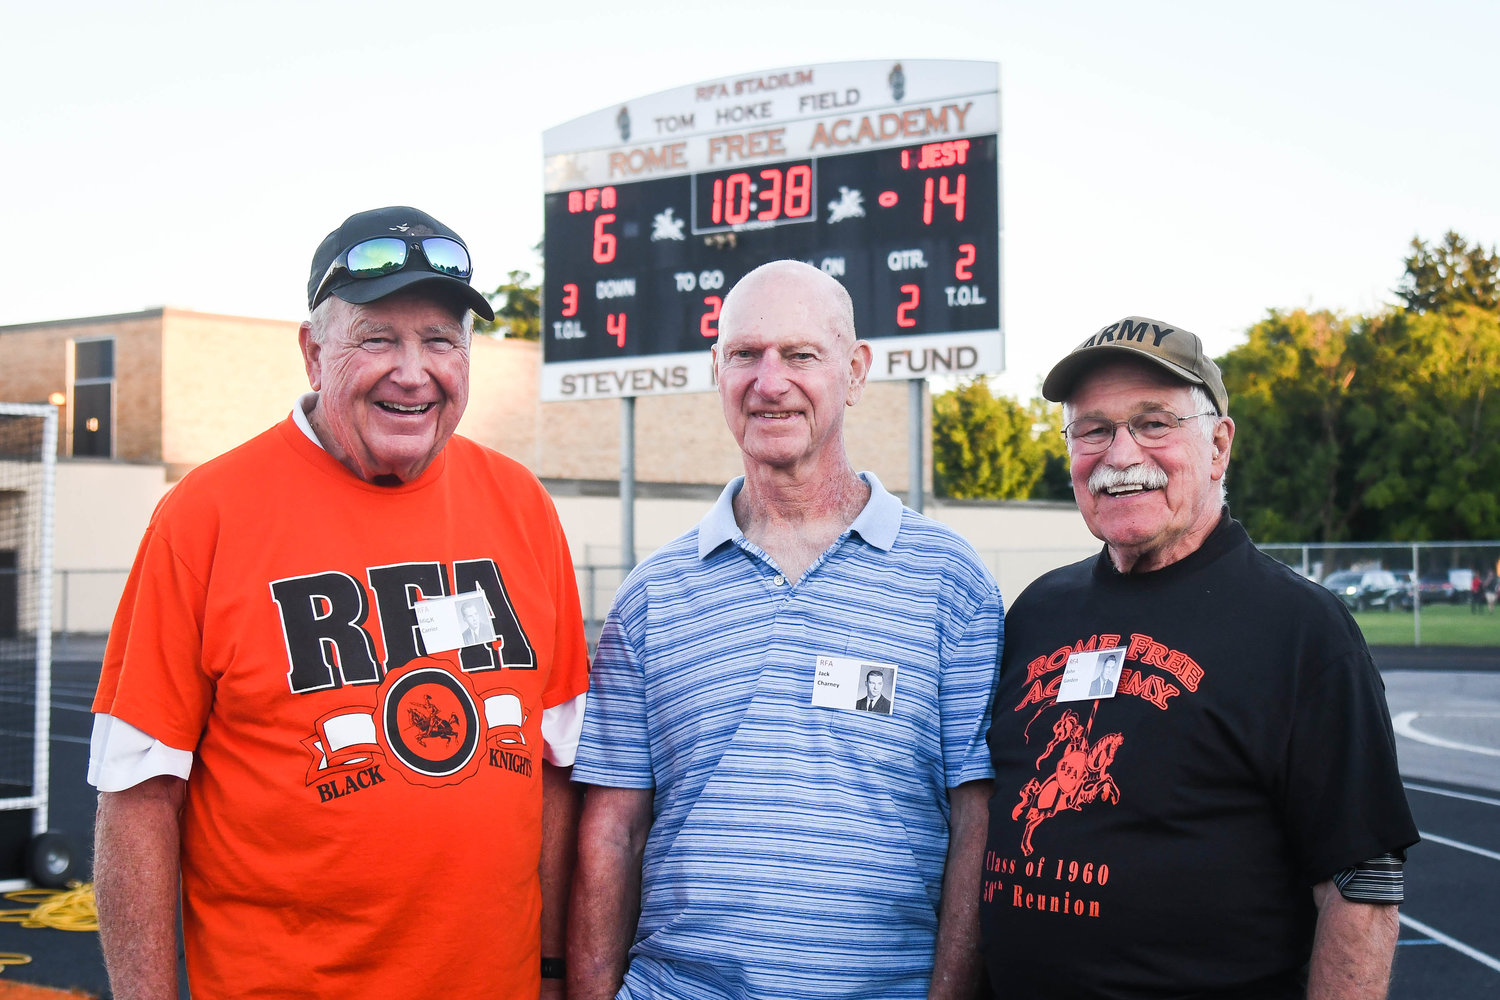 Three members of the 1959 undefeated Rome Free Academy football team were honored after the first quarter of the non-league game between New Hartford and Rome Free Academy on Friday night at RFA Stadium. They are, from left, Mick Carrier, Jack Charney and John Gordon.